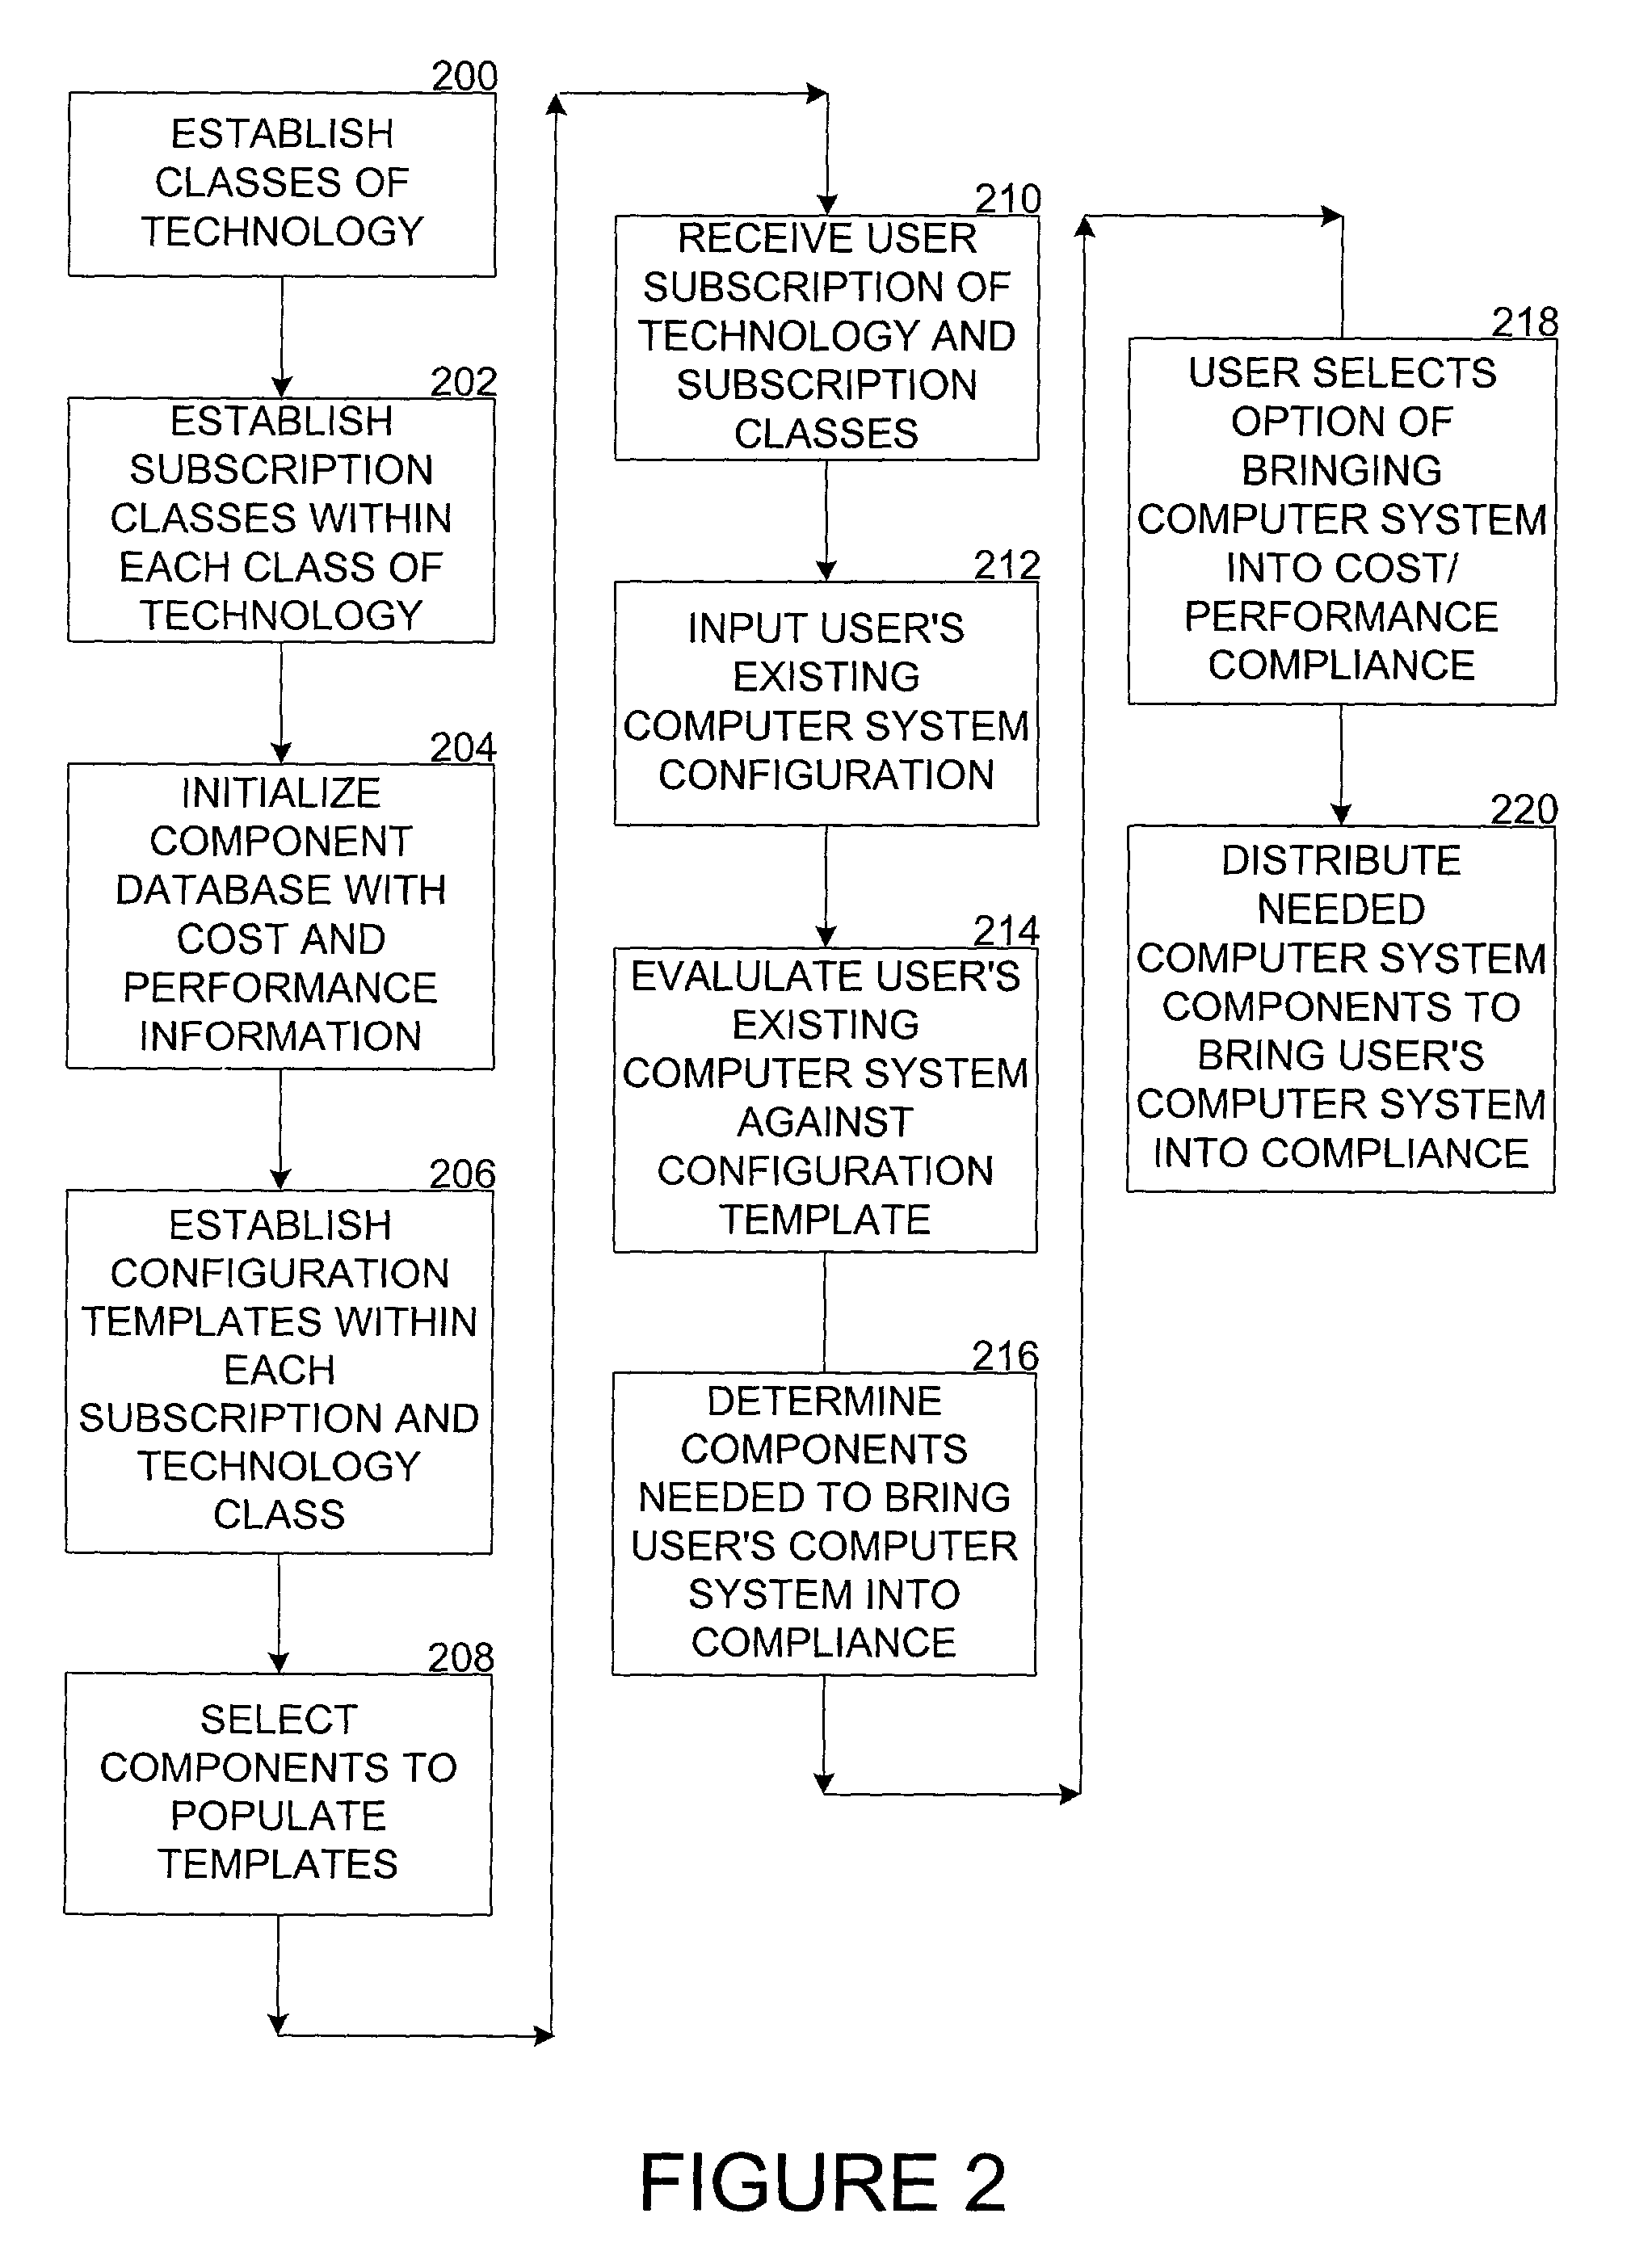 System and method for maintaining a predetermined price/performance level of technology on a computer system during a subscription